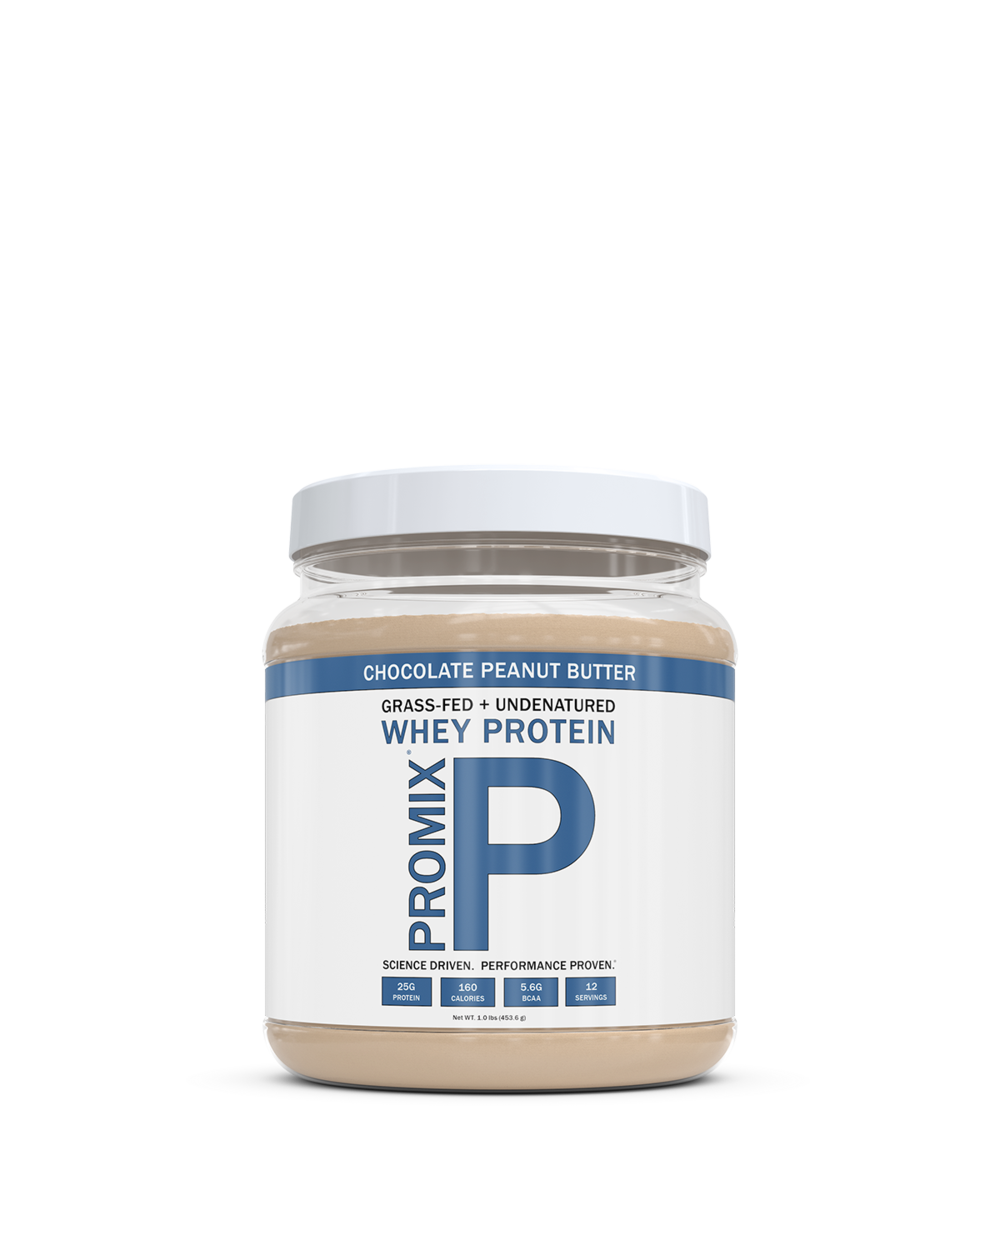 Chocolate Peanut Butter Whey Protein Powder, Size: 1 LB